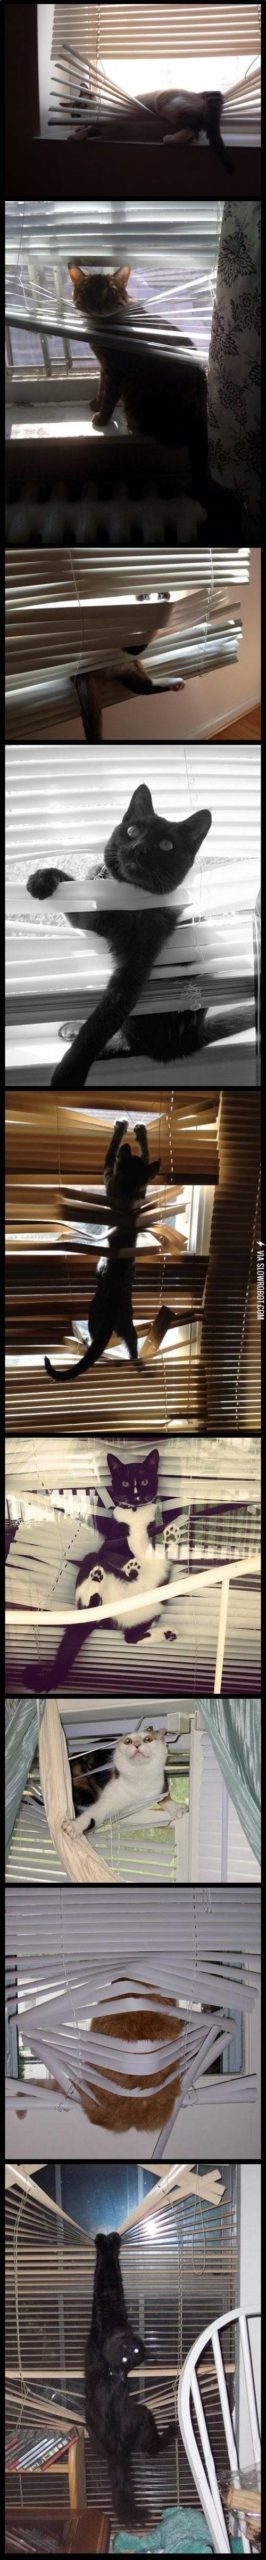 Cats+and+blinds.